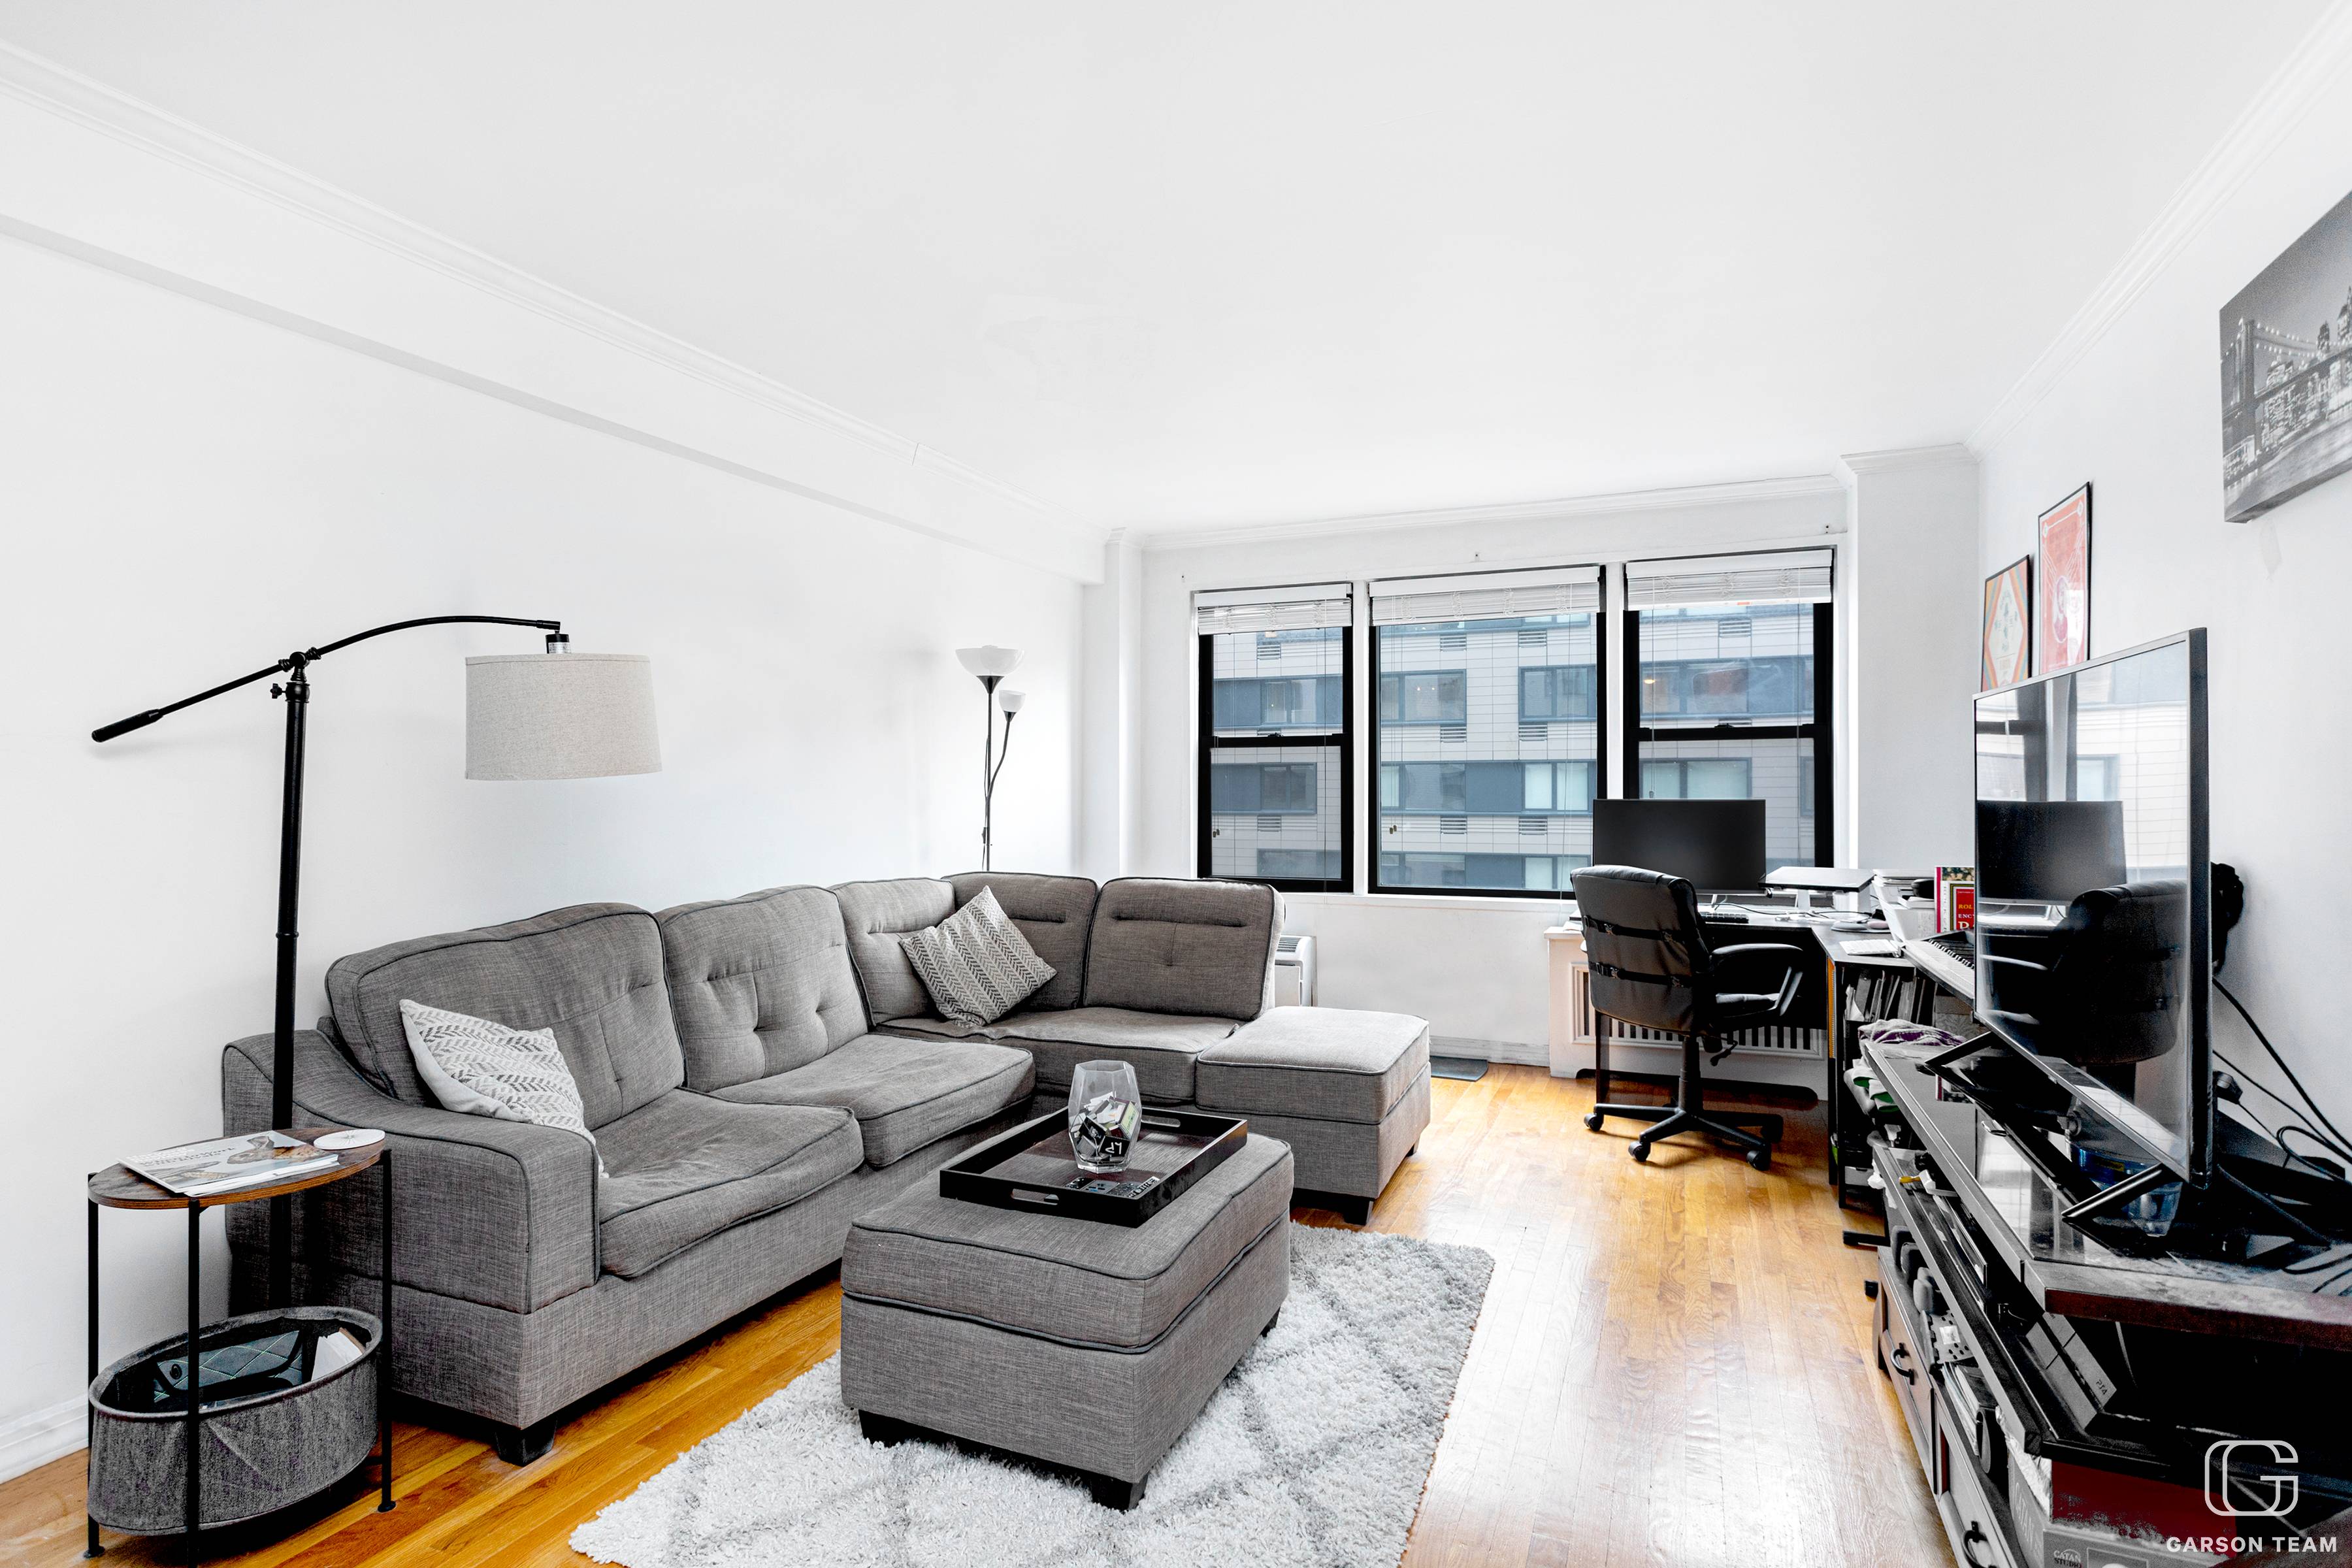 Welcome to this open and airy one bed one bath condo in the heart of Murray Hill.